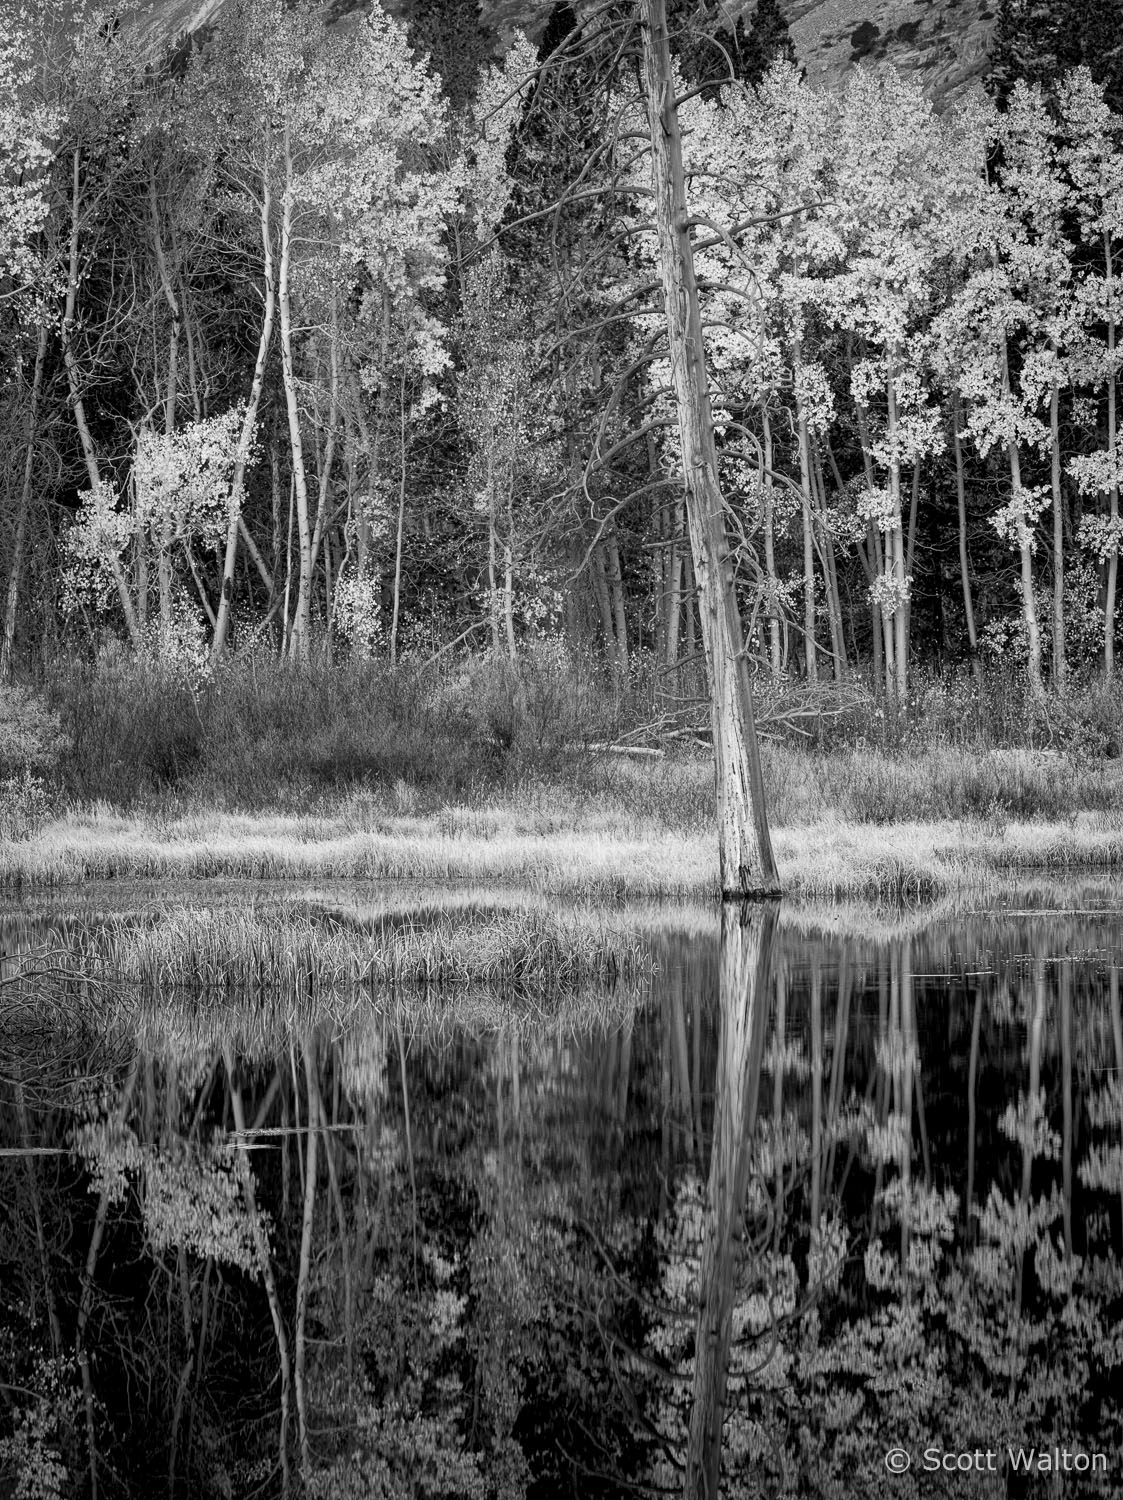 aspen-forest-reflections-pond-bw-lundy-canyon-california.jpg